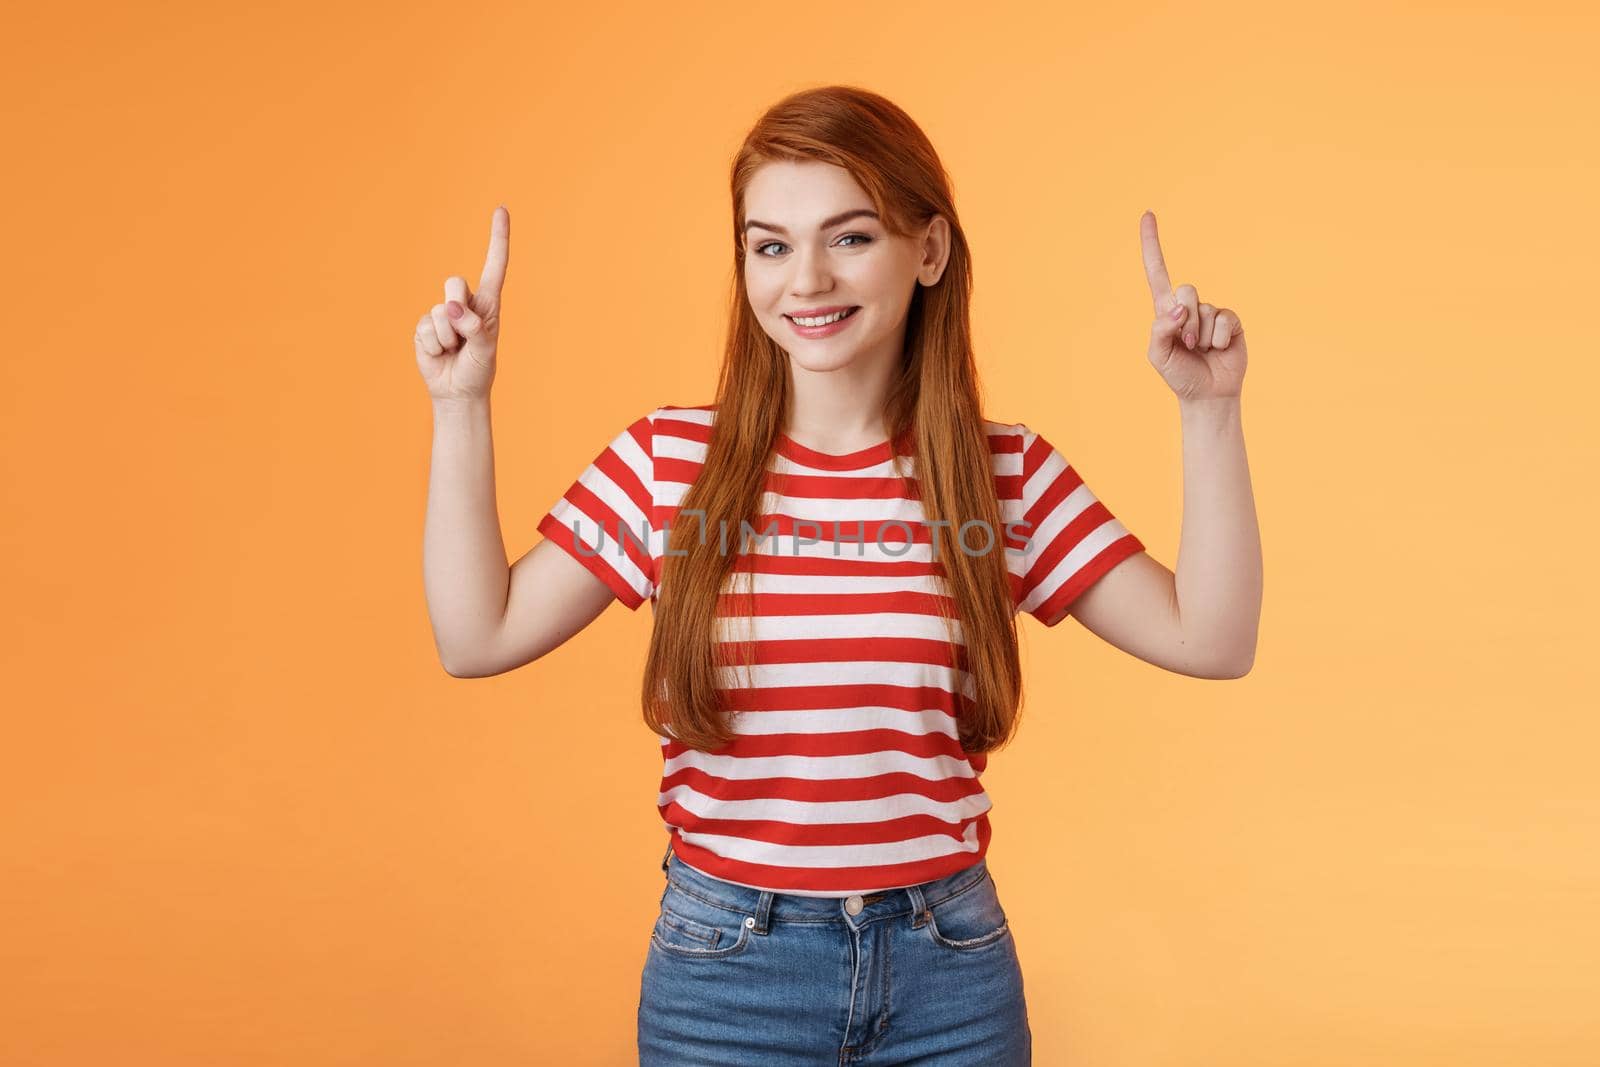 Cheerful beautiful redhead woman smiling invite try out new product, pointing up, show top copy space, grinning joyfully, rejoice introduce cool thing, stand orange background casual urban outfit.